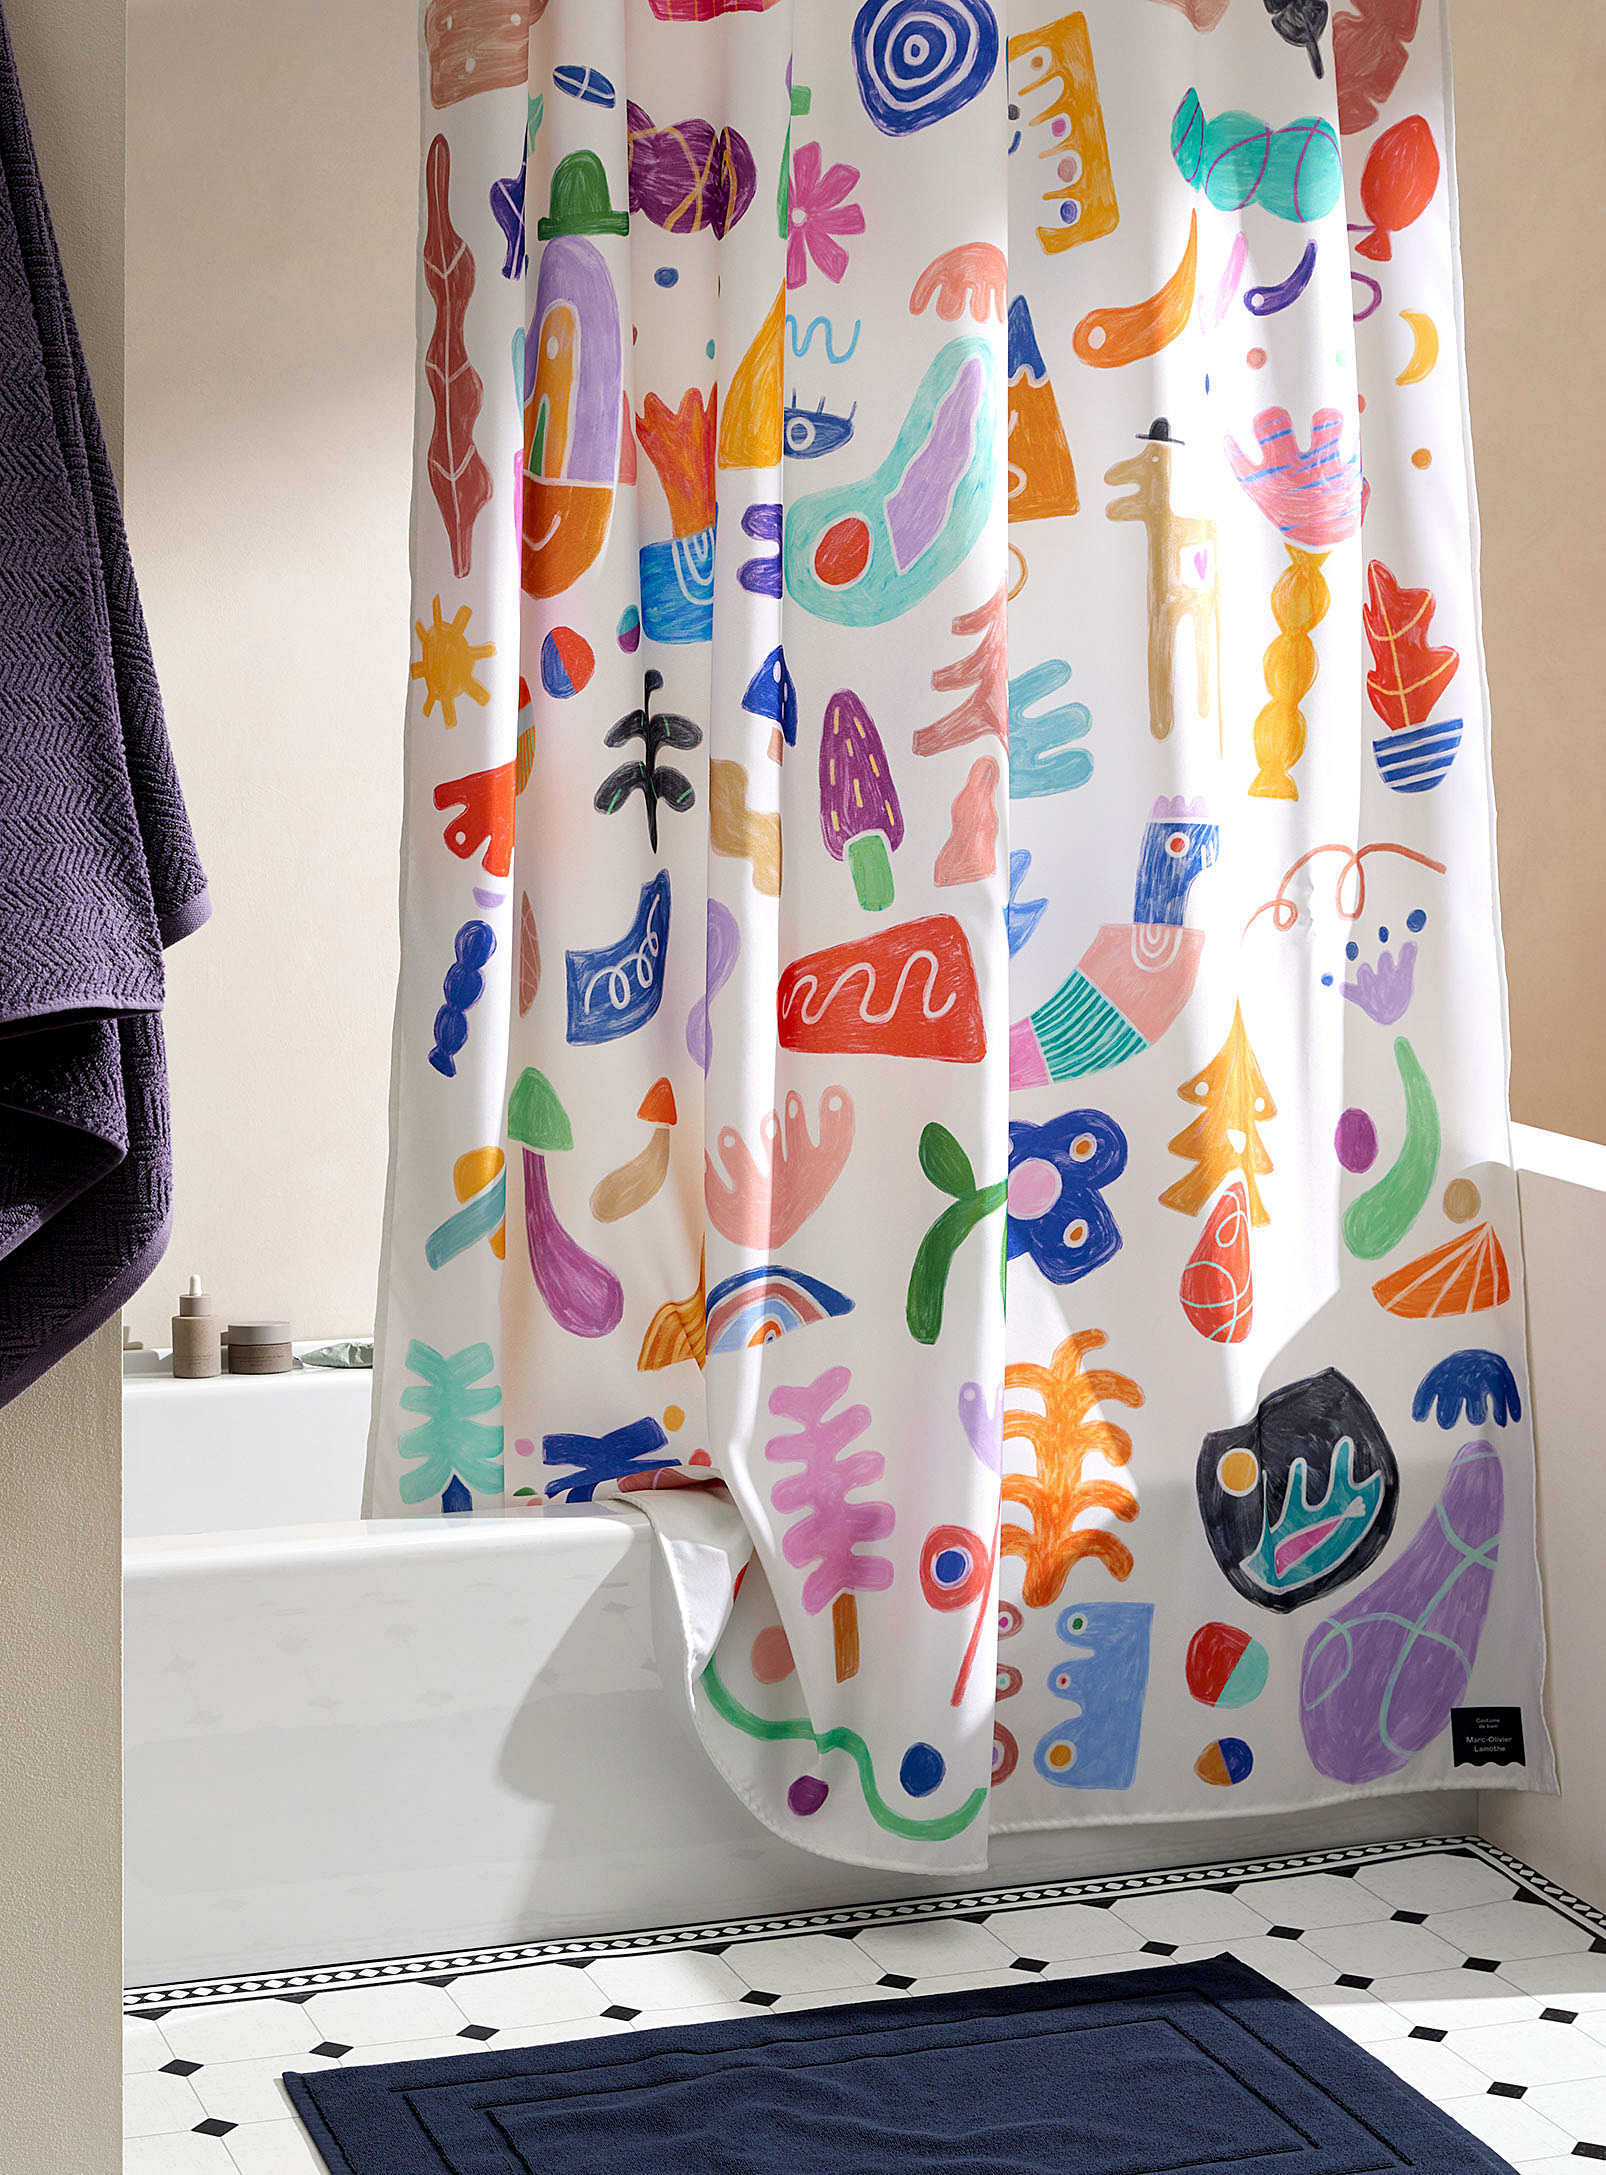 Costume de bain - I am everything shower curtain In collaboration with artist Marc-Oliver Lamothe